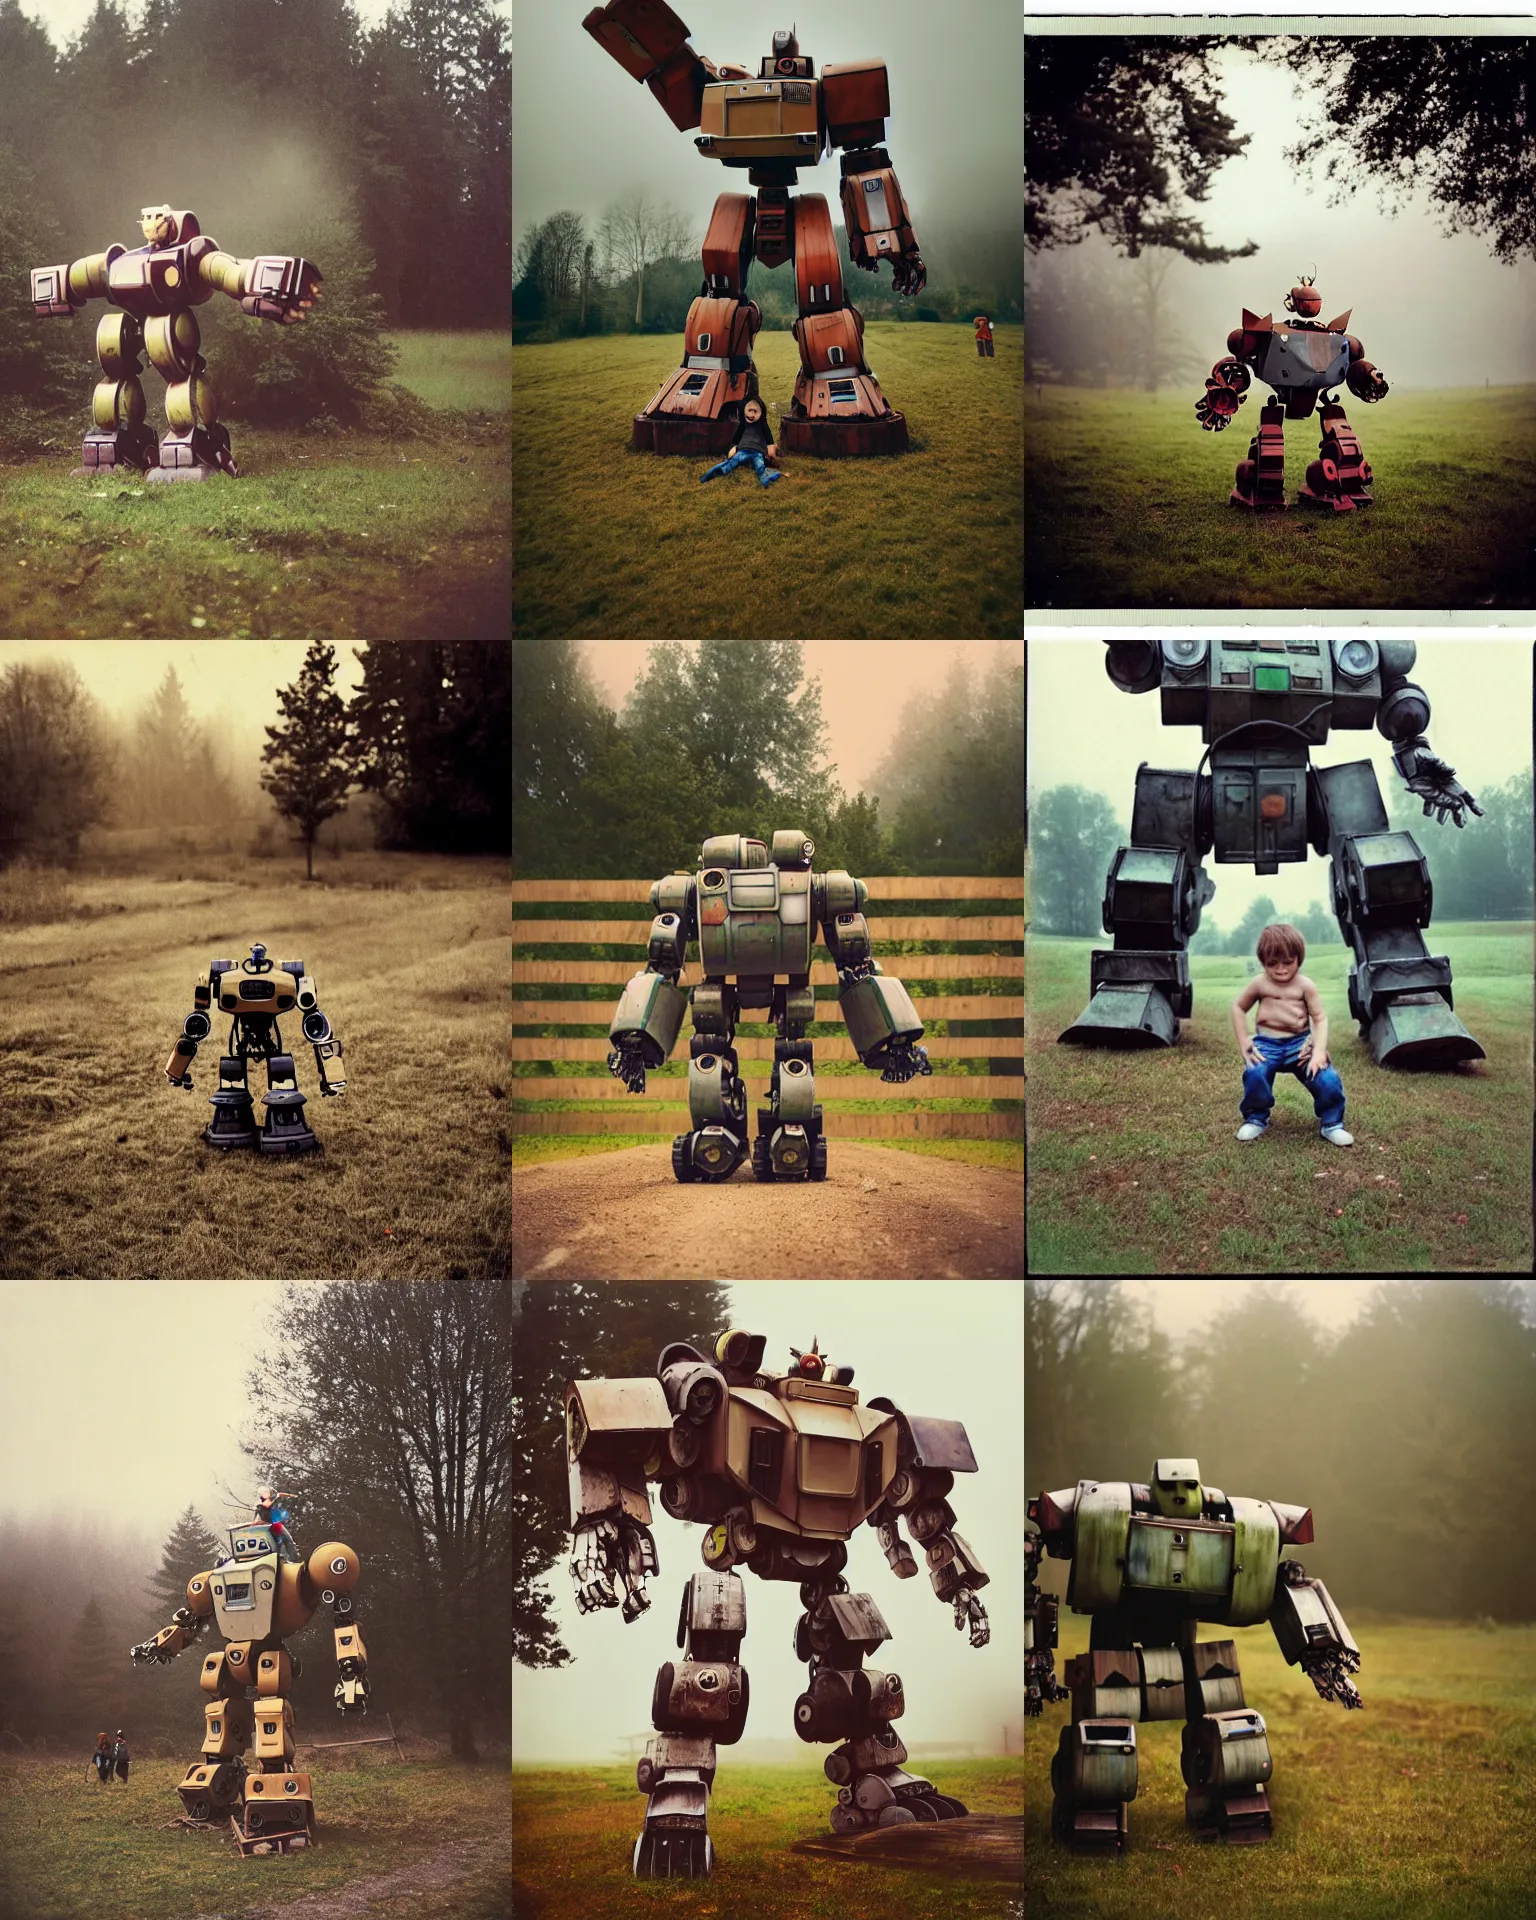 Prompt: giant oversized battle pose robot mech as giant baby on a village, wooden fence and tree remains in far background, hero pose, Cinematic focus, Polaroid photo, vintage, neutral colors, soft lights, foggy, by Steve Hanks, by Serov Valentin, by lisa yuskavage, by Andrei Tarkovsky